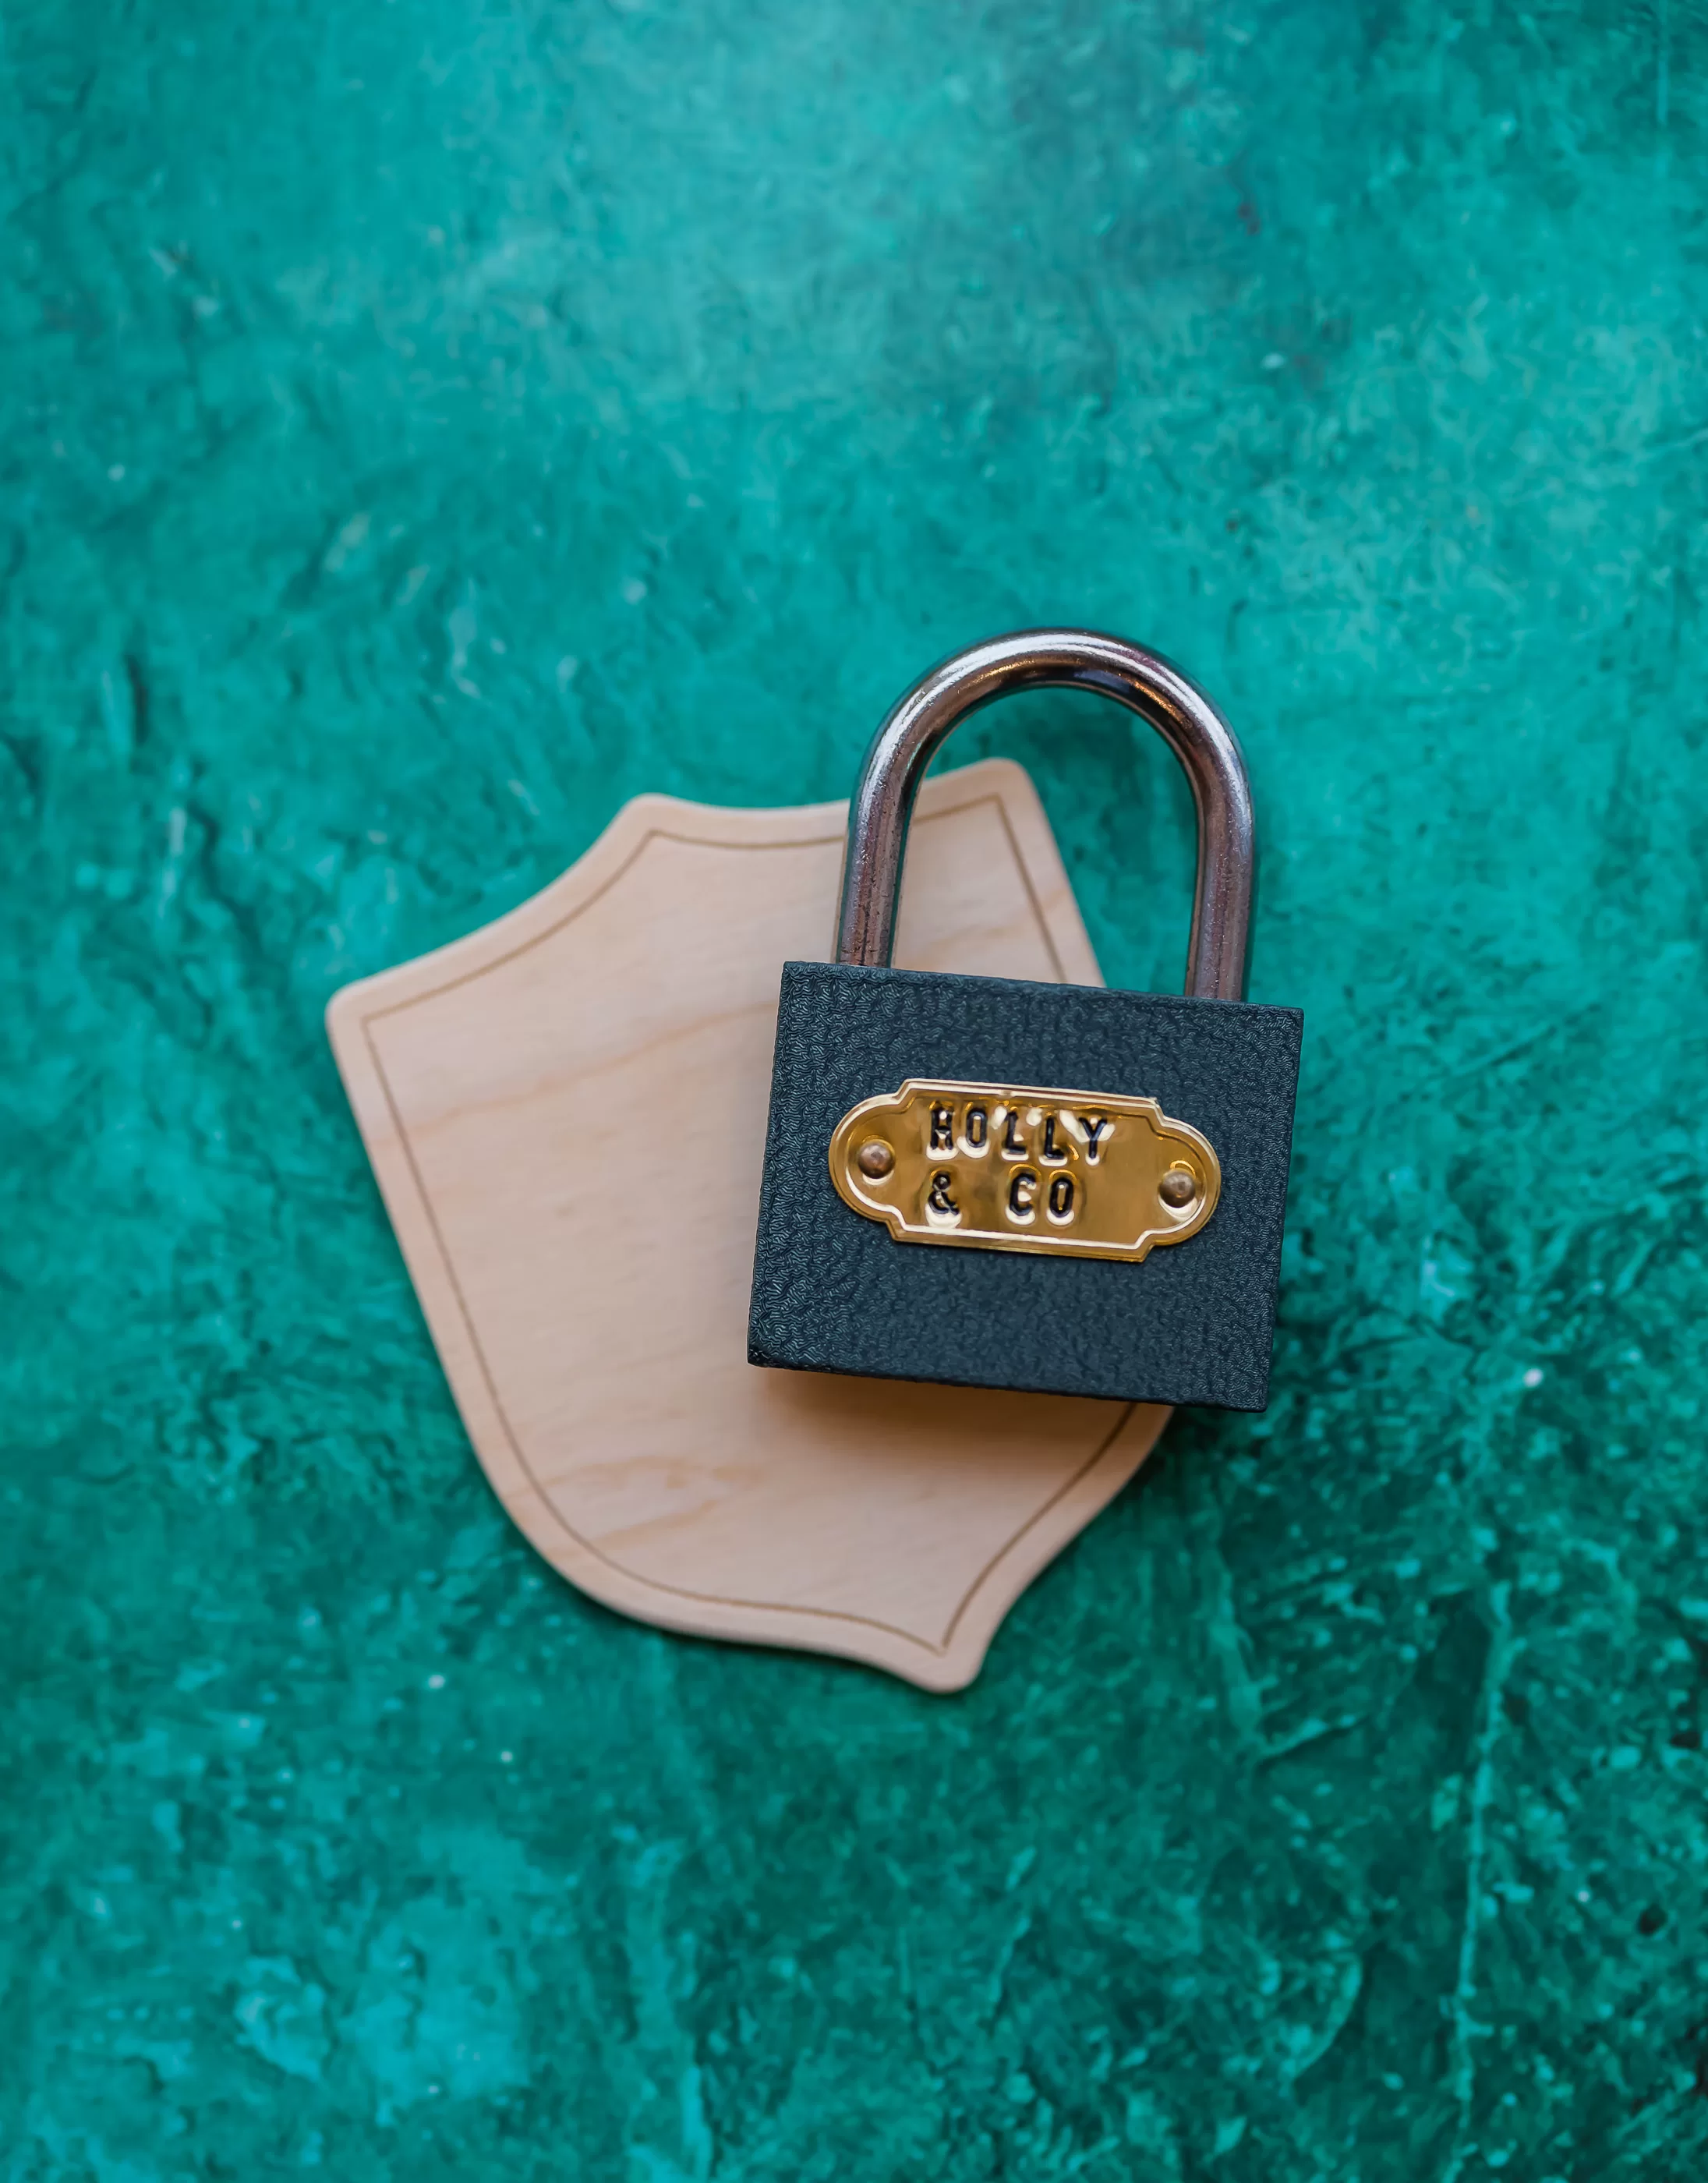 Holly & Co Lock and Wooden shield